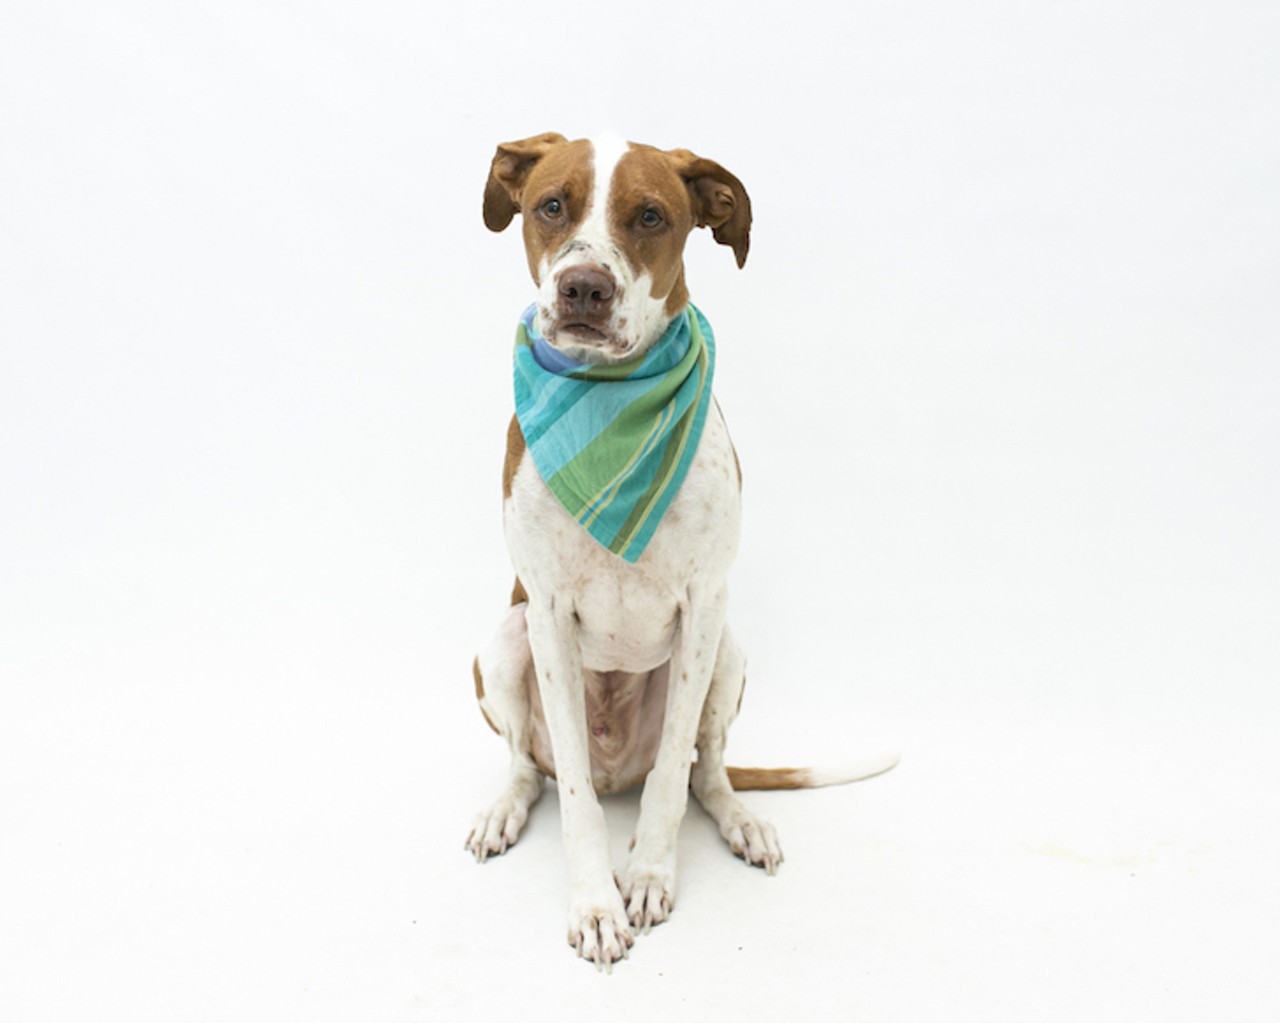 24 adoptable pups available right now at Orange County Animal Services